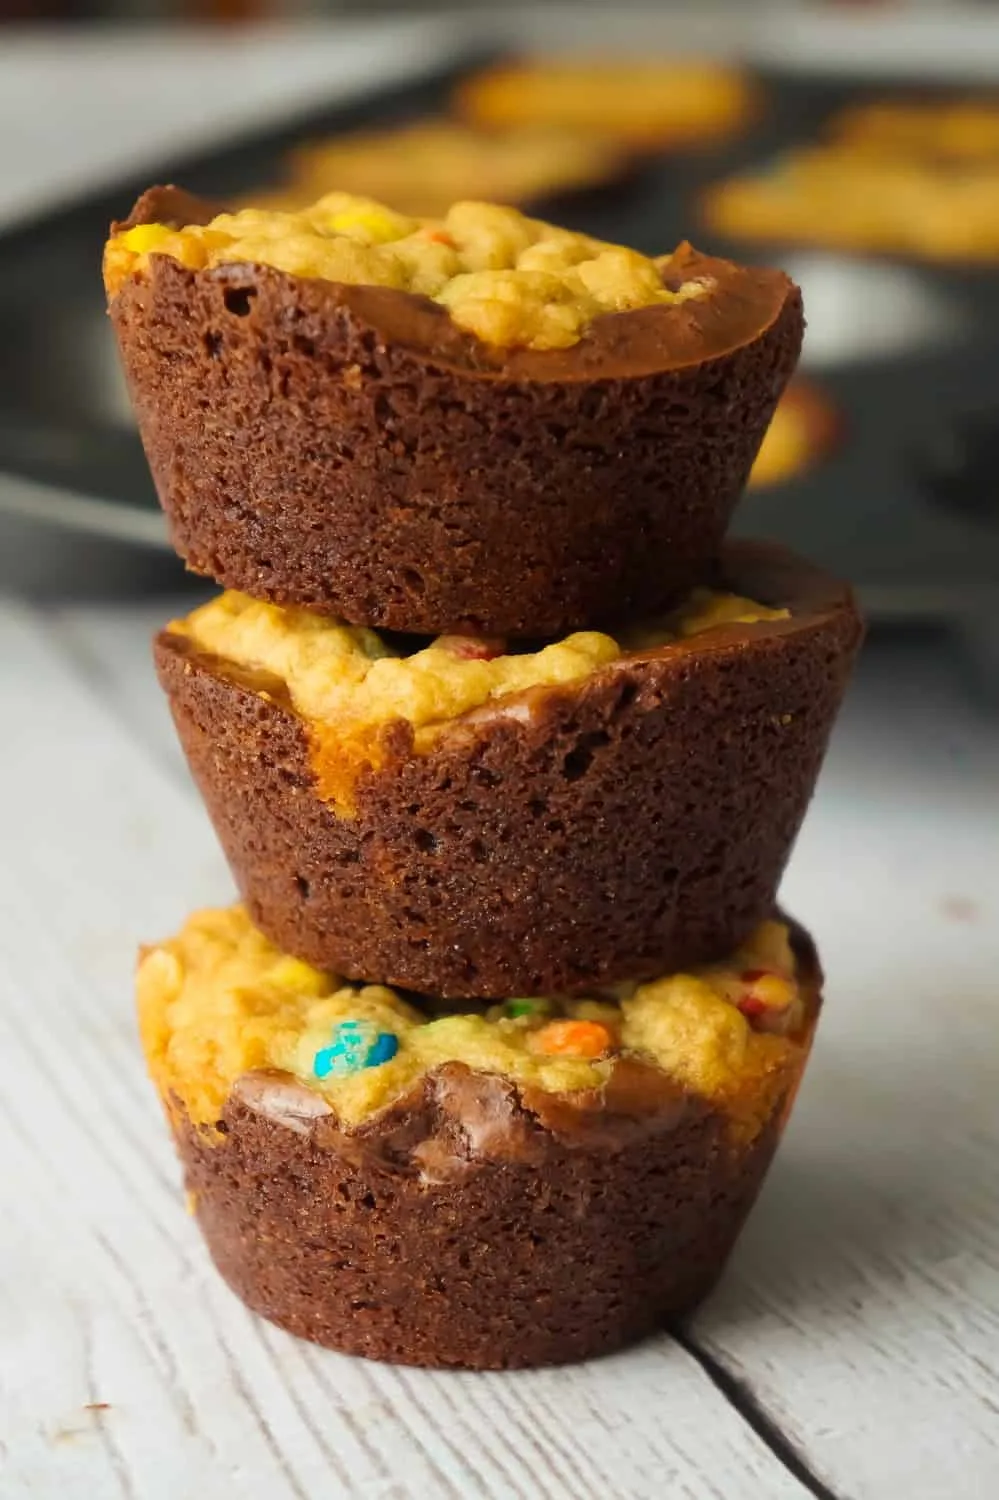 Monster Cookie Brownie Cups are an easy dessert recipe using boxed brownie mix and homemade oatmeal peanut butter cookie dough. These chewy brownie cups are loaded with mini M&Ms.